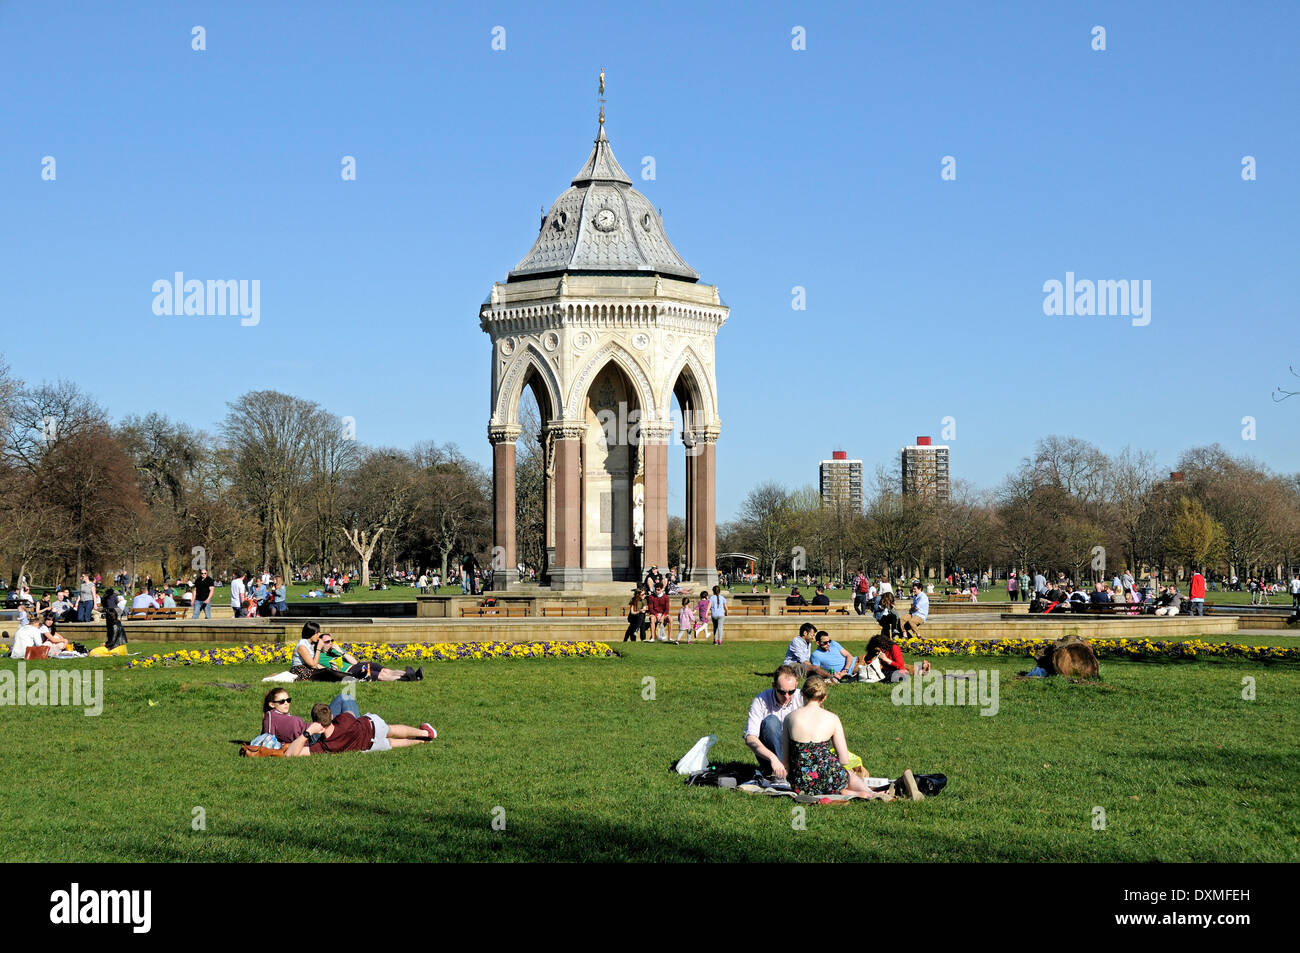 People sitting on the grass in Victoria Park with the Burdett-Coutts Memorial Drinking-Fountain Tower Hamlets London England UK Stock Photo